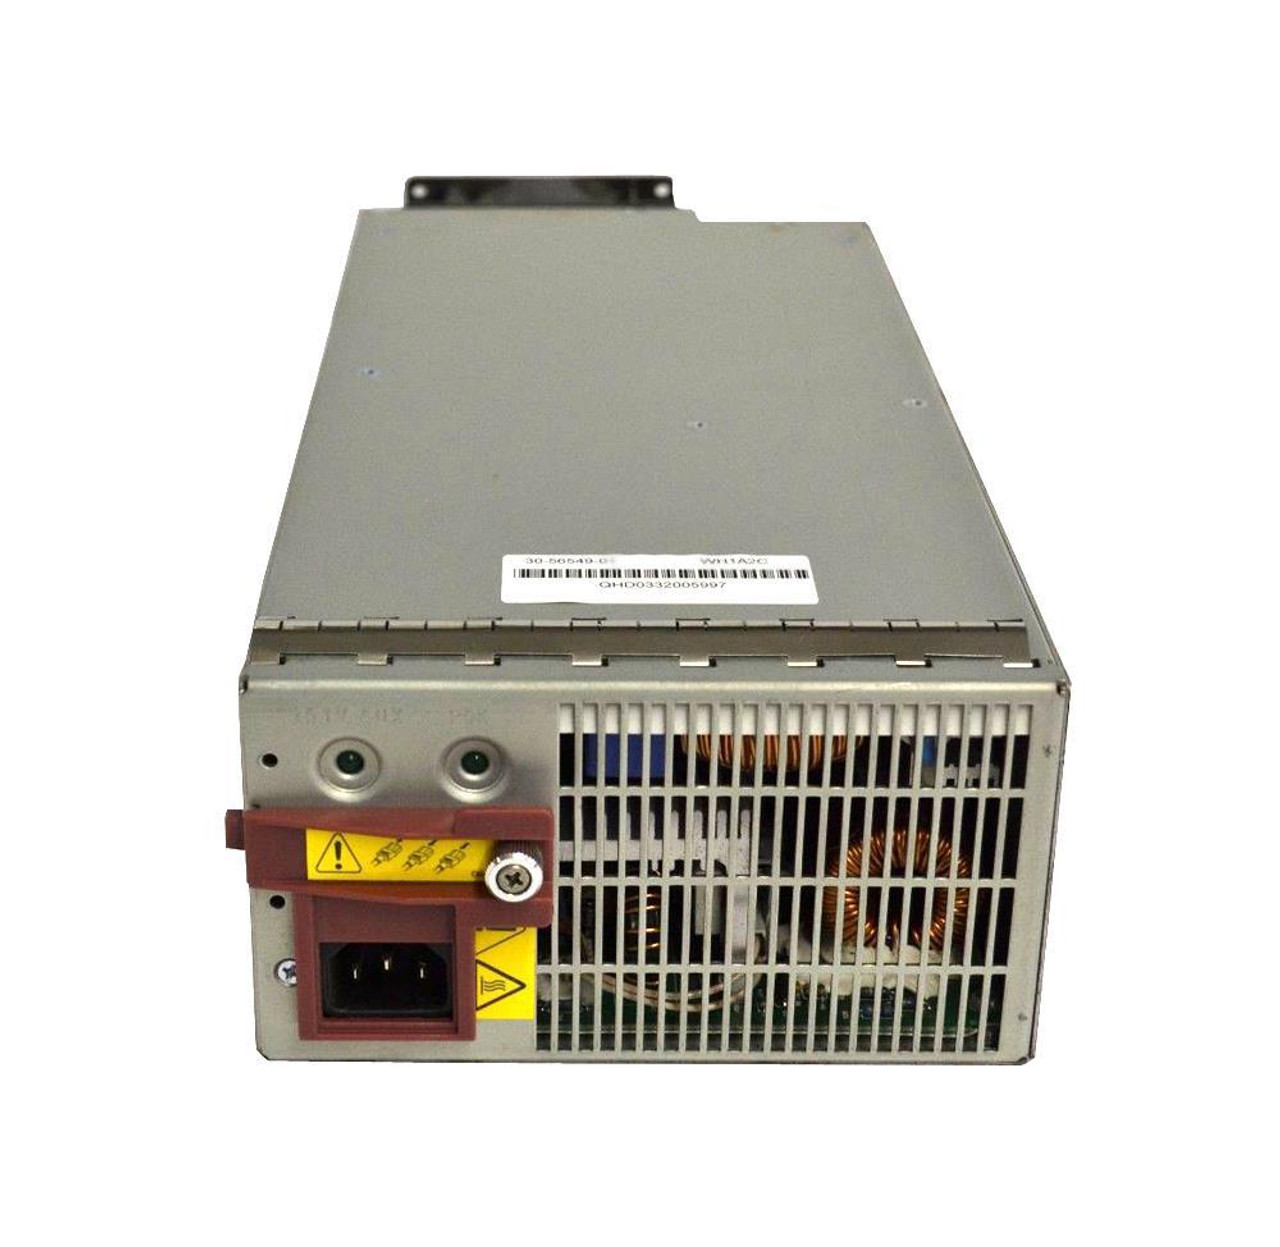 30-56549-02 HP Powers Supply for AlphaServer ES45